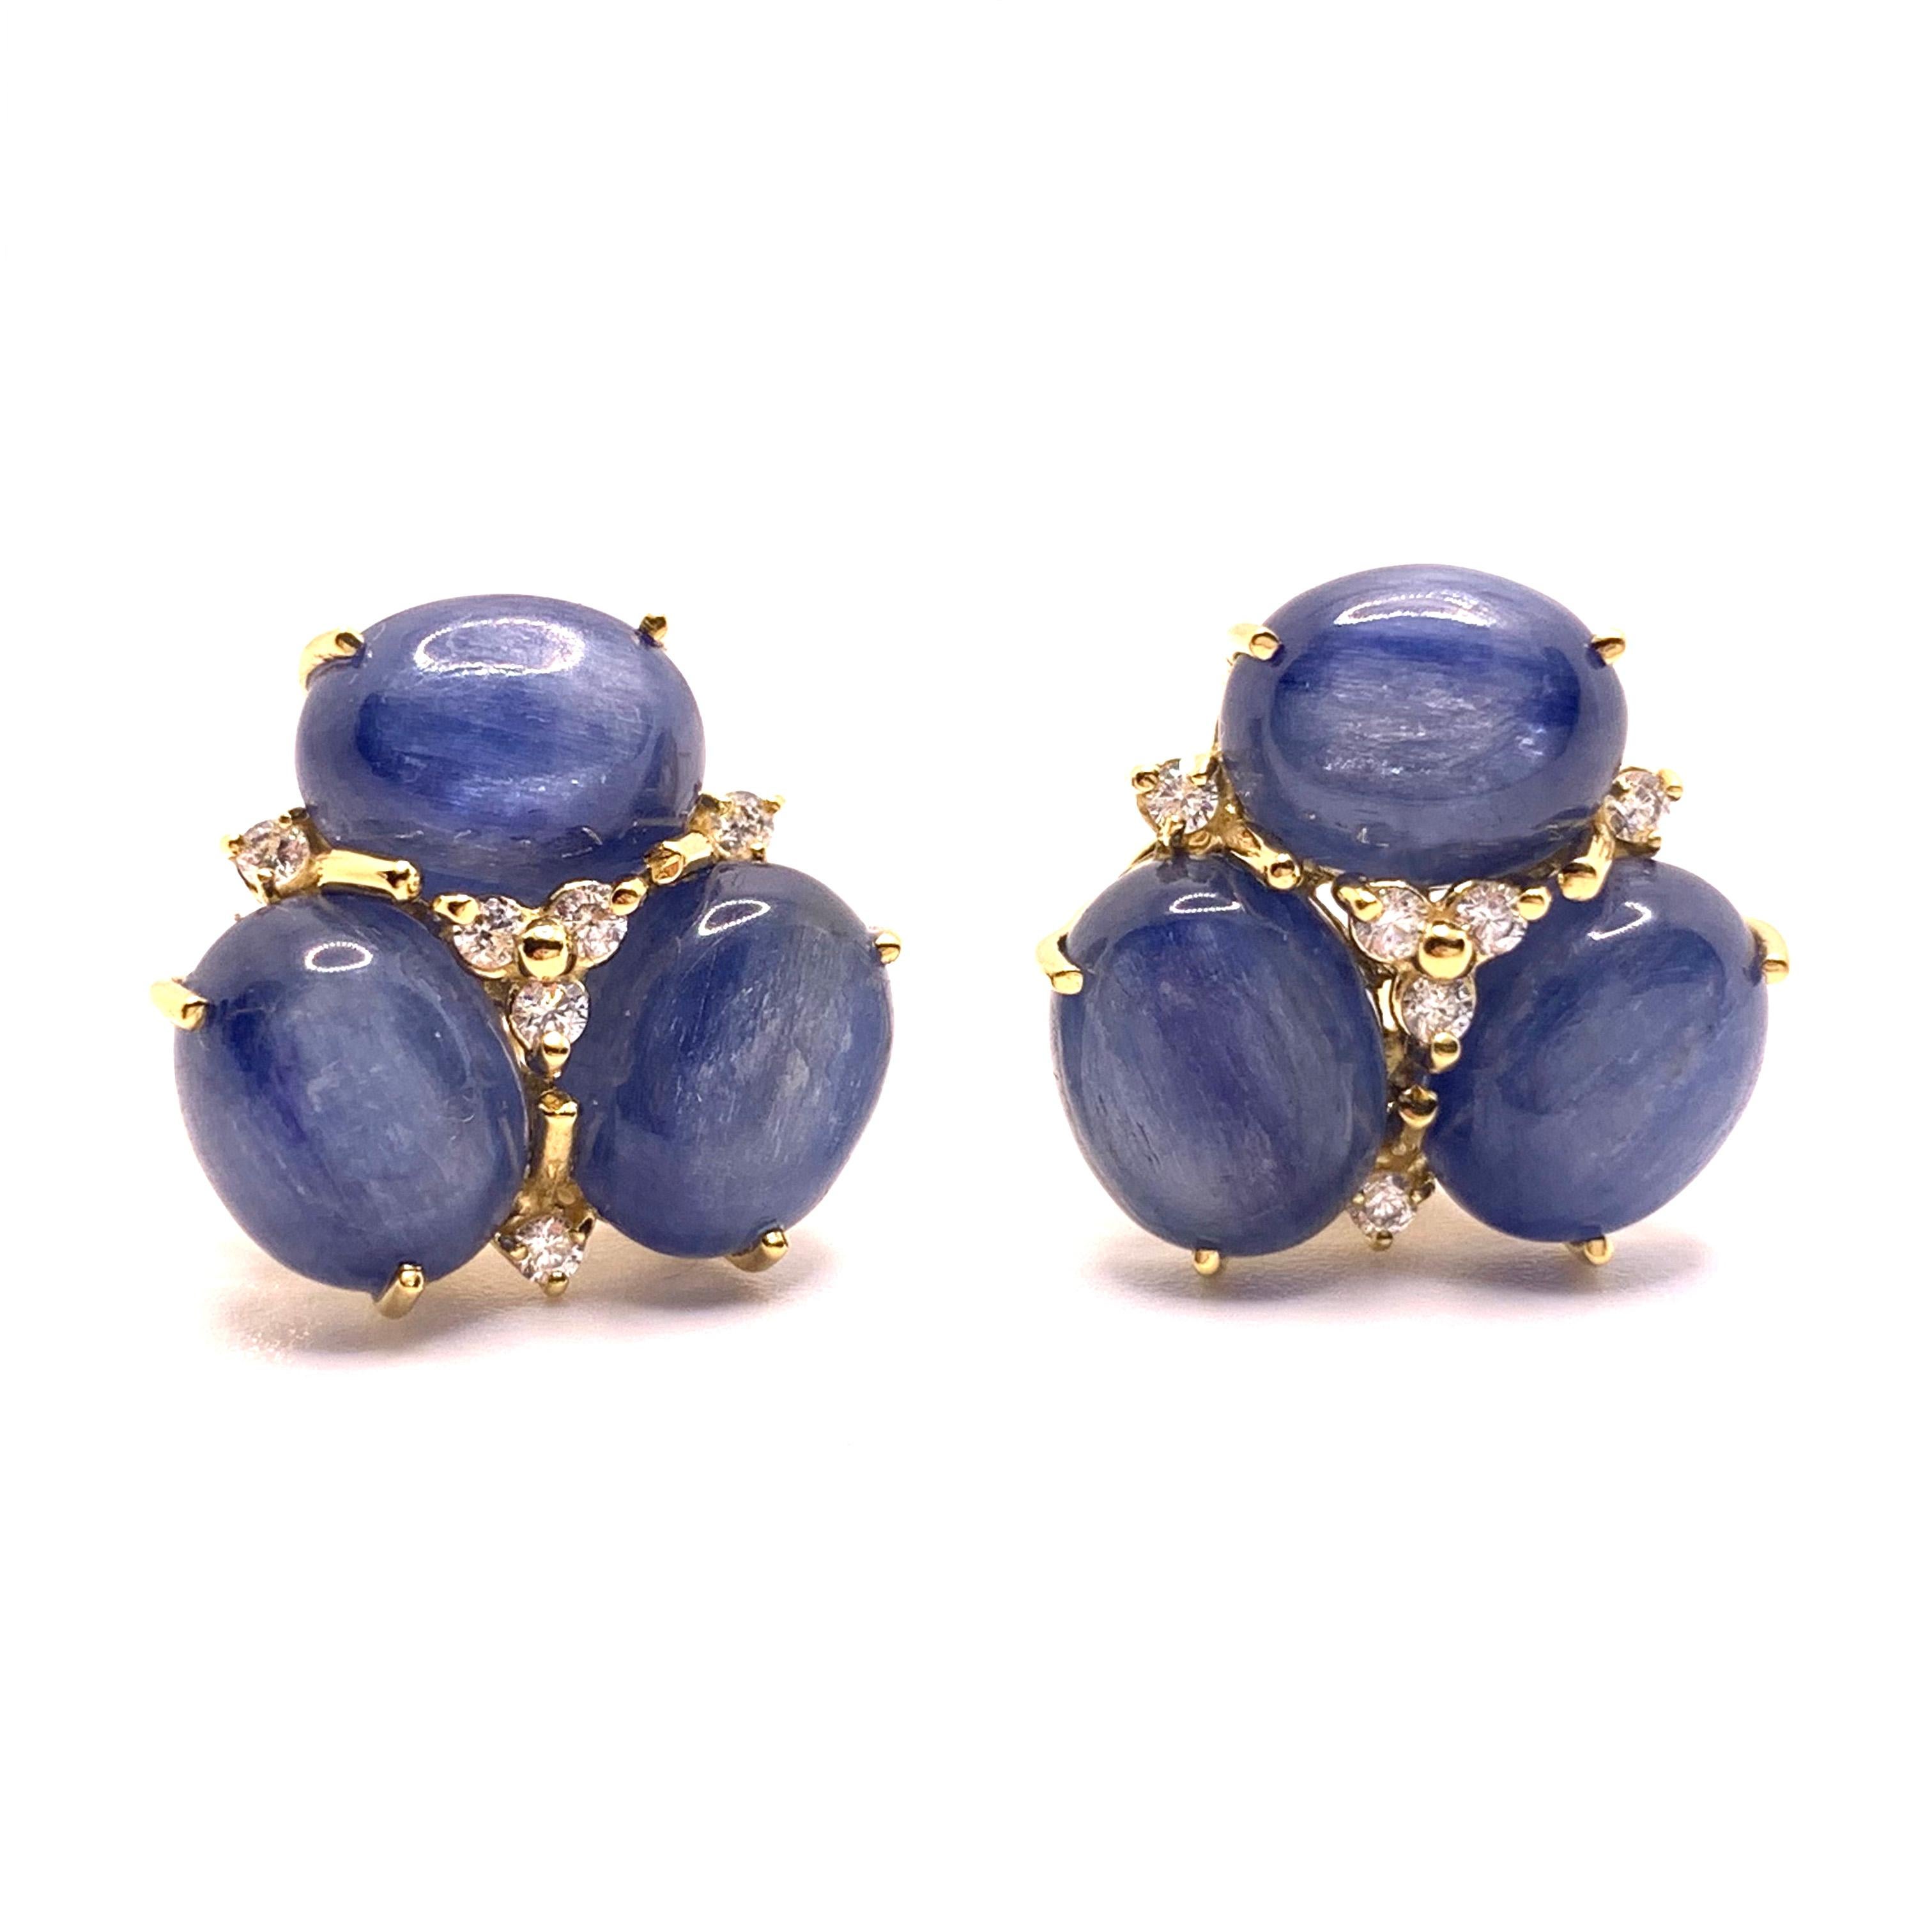 These stunning pair of earrings feature sets of oval cabochon-cut blue kyanite adorned with round simulated diamond, handset in 18k yellow gold vermeil over sterling silver. The oval kyanite stones have rich blue sapphire hue and produce beautiful